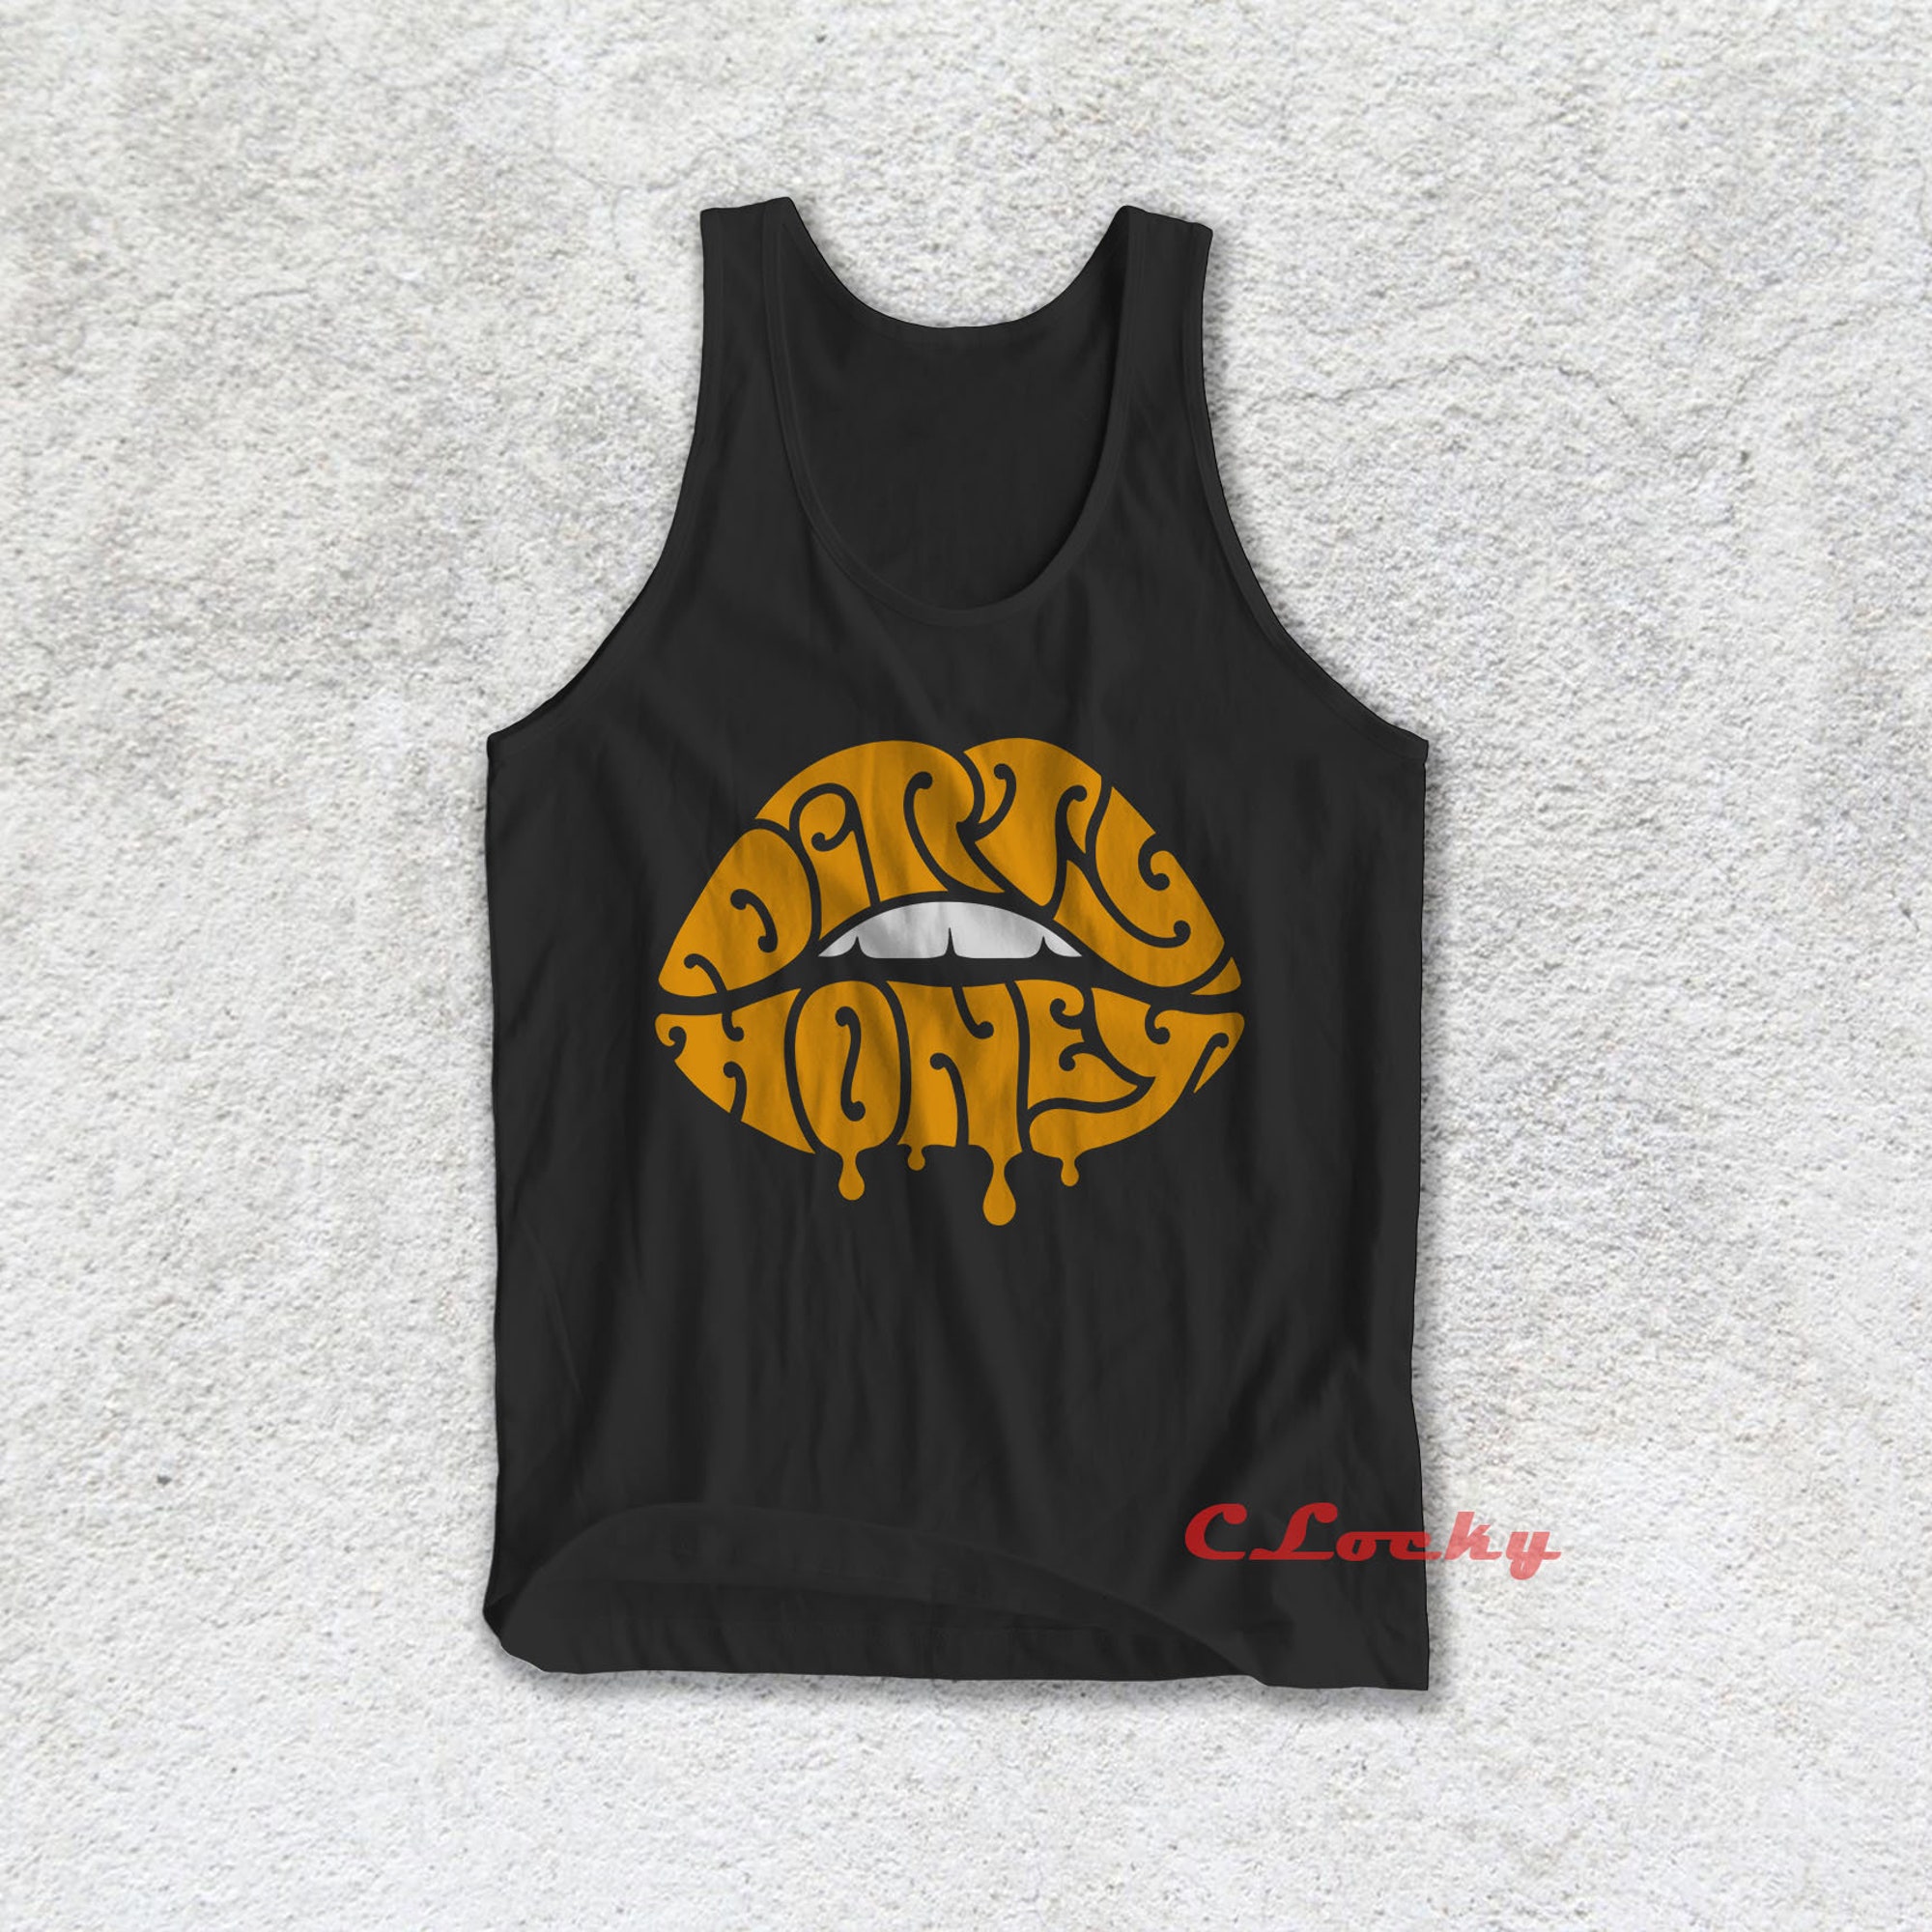 Discover Dirty Honey Tank Top American Rock Blues Rock Hard Rock Marc LaBelle Music Band Top